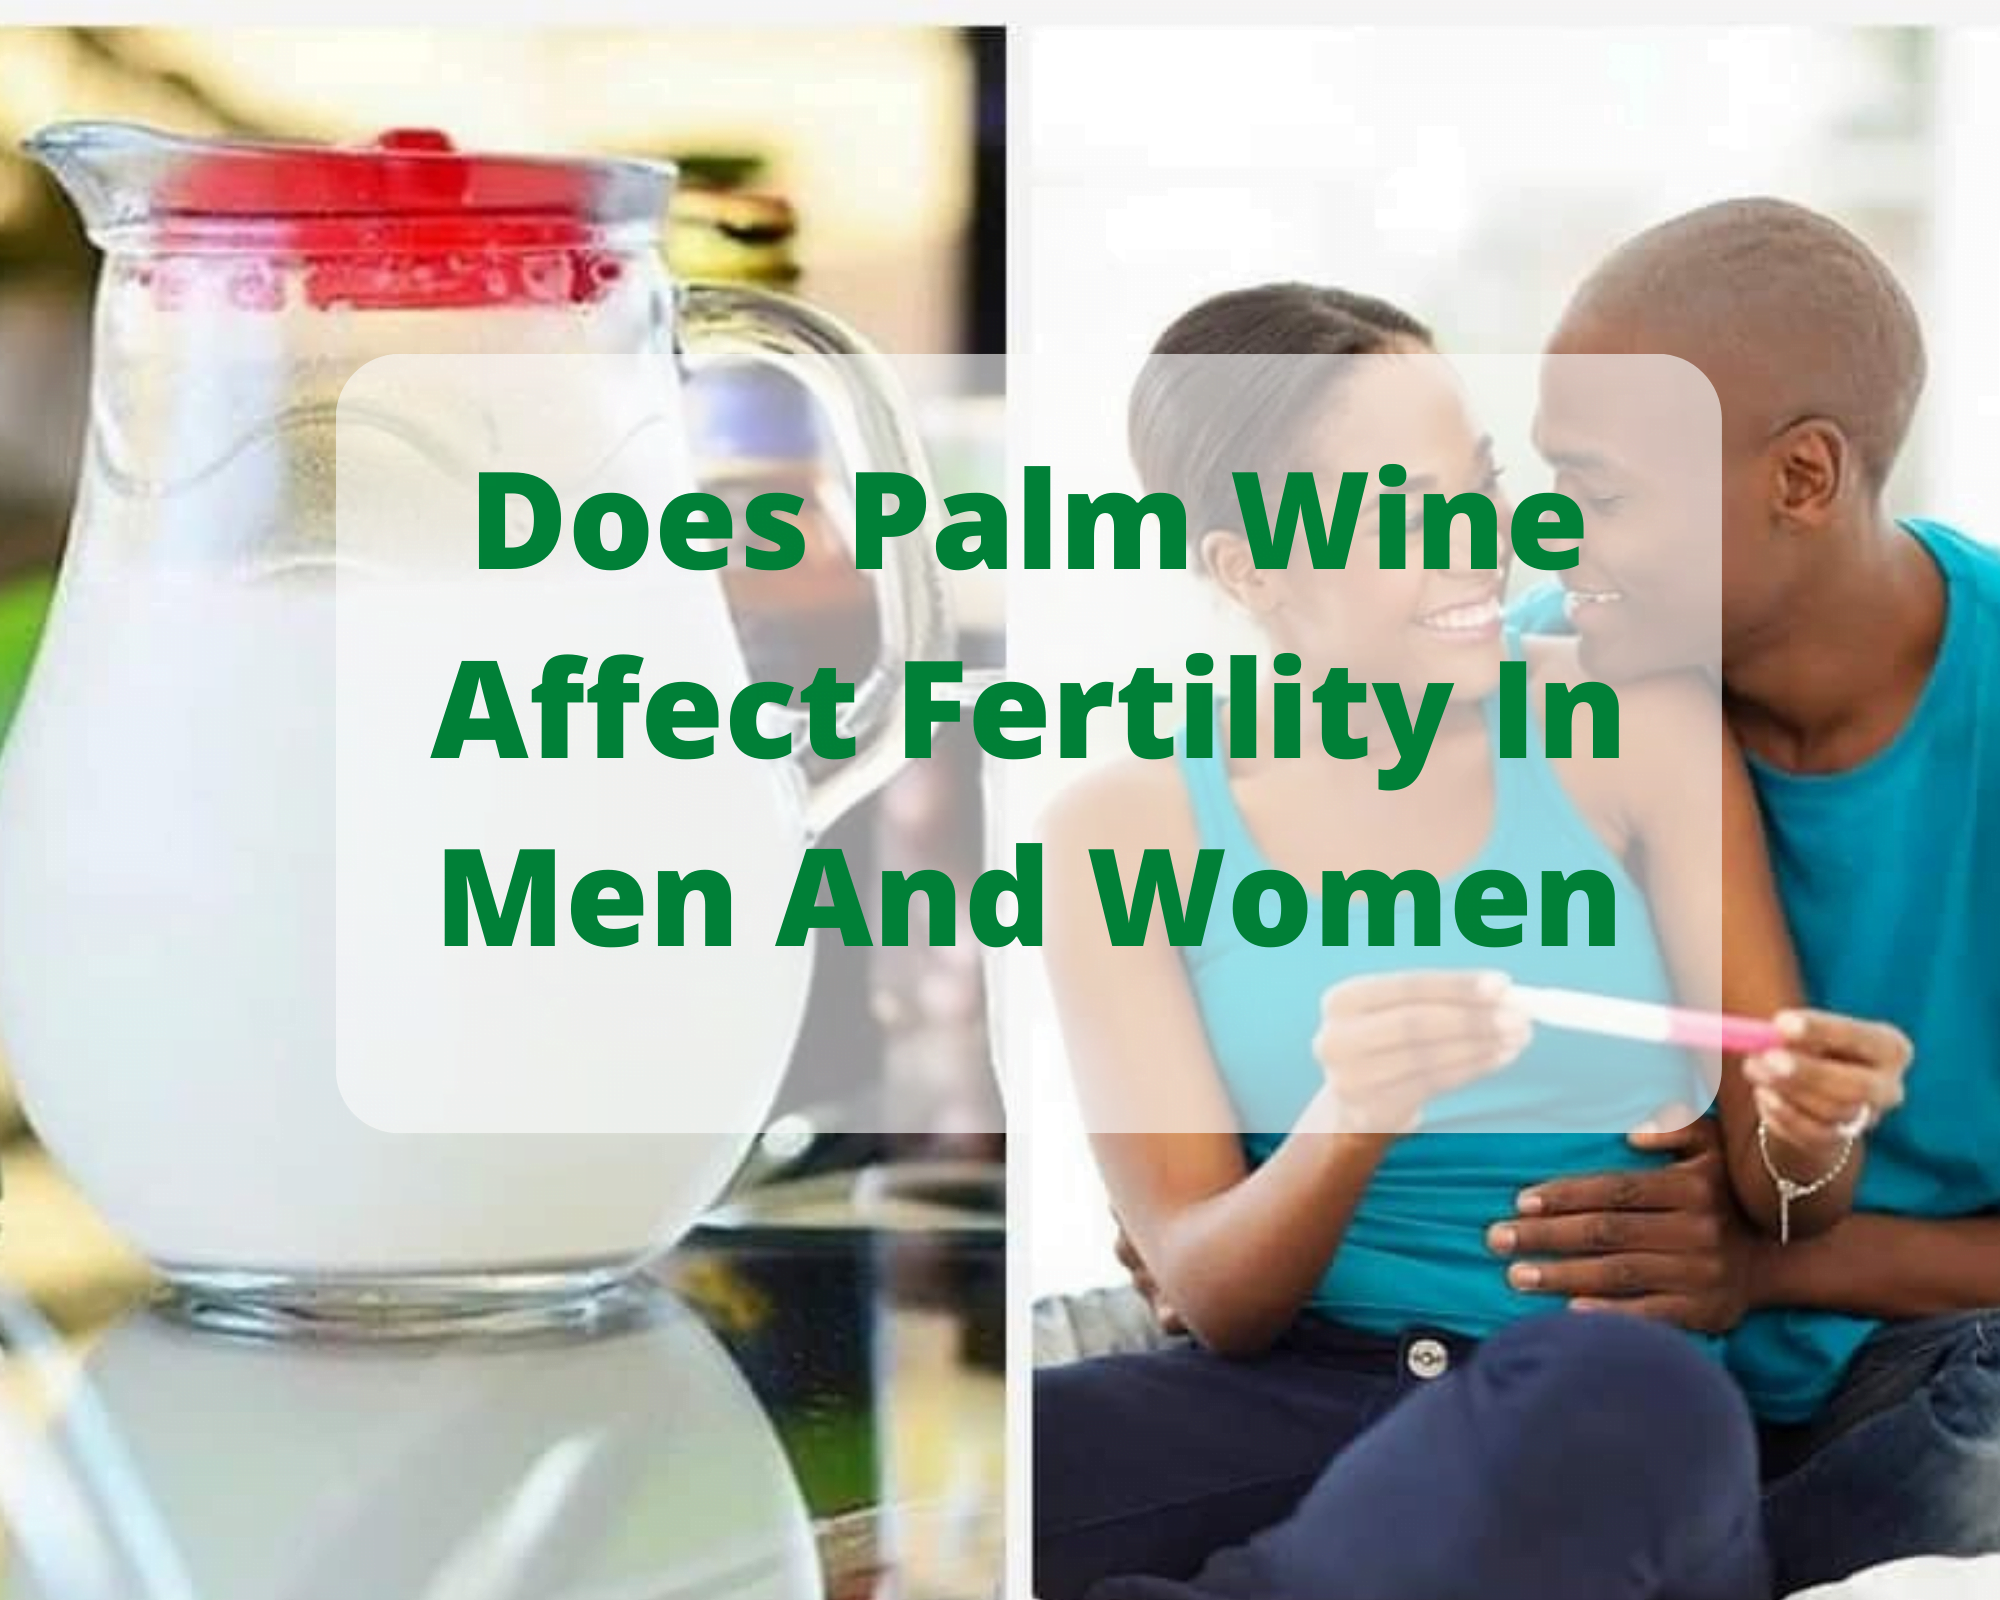 Does Palm Wine Affect Fertility In Men And Women